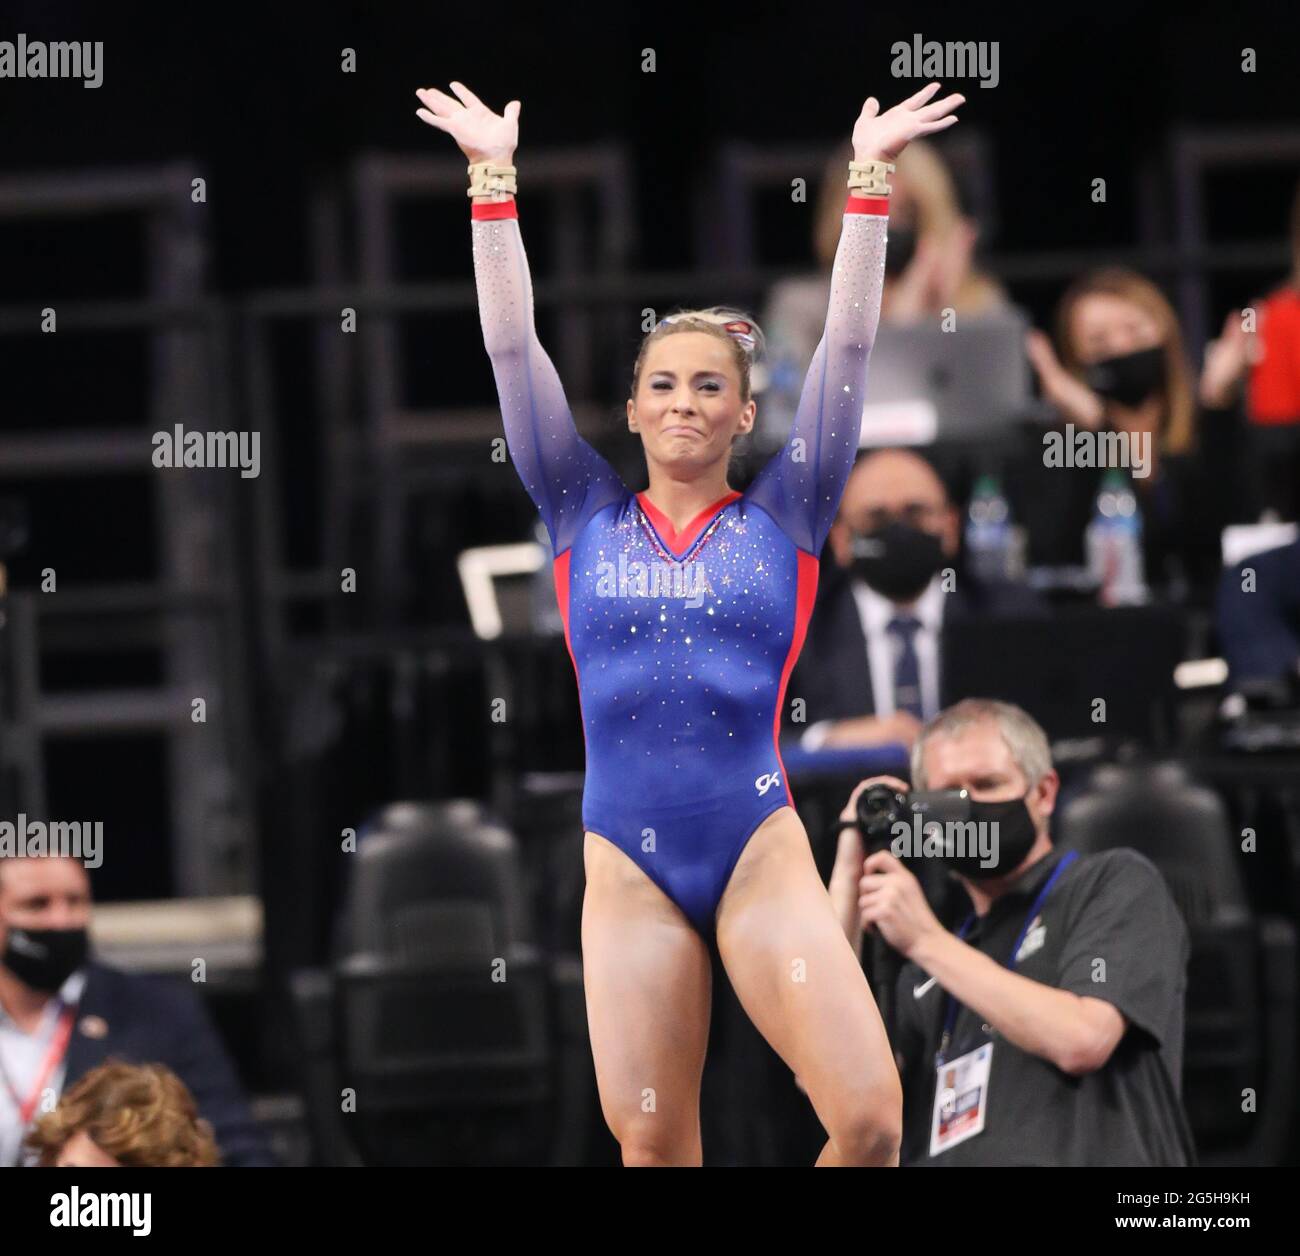 St Louis, USA. June 27, 2021: Mykayla Skinner waves to her fans following her last performance of the night during Day 2 of the 2021 U.S. Women's Gymnastics Olympic Team Trials at the Dome at America's Center in St. Louis, MO. Kyle Okita/CSM Credit: Cal Sport Media/Alamy Live News Stock Photo